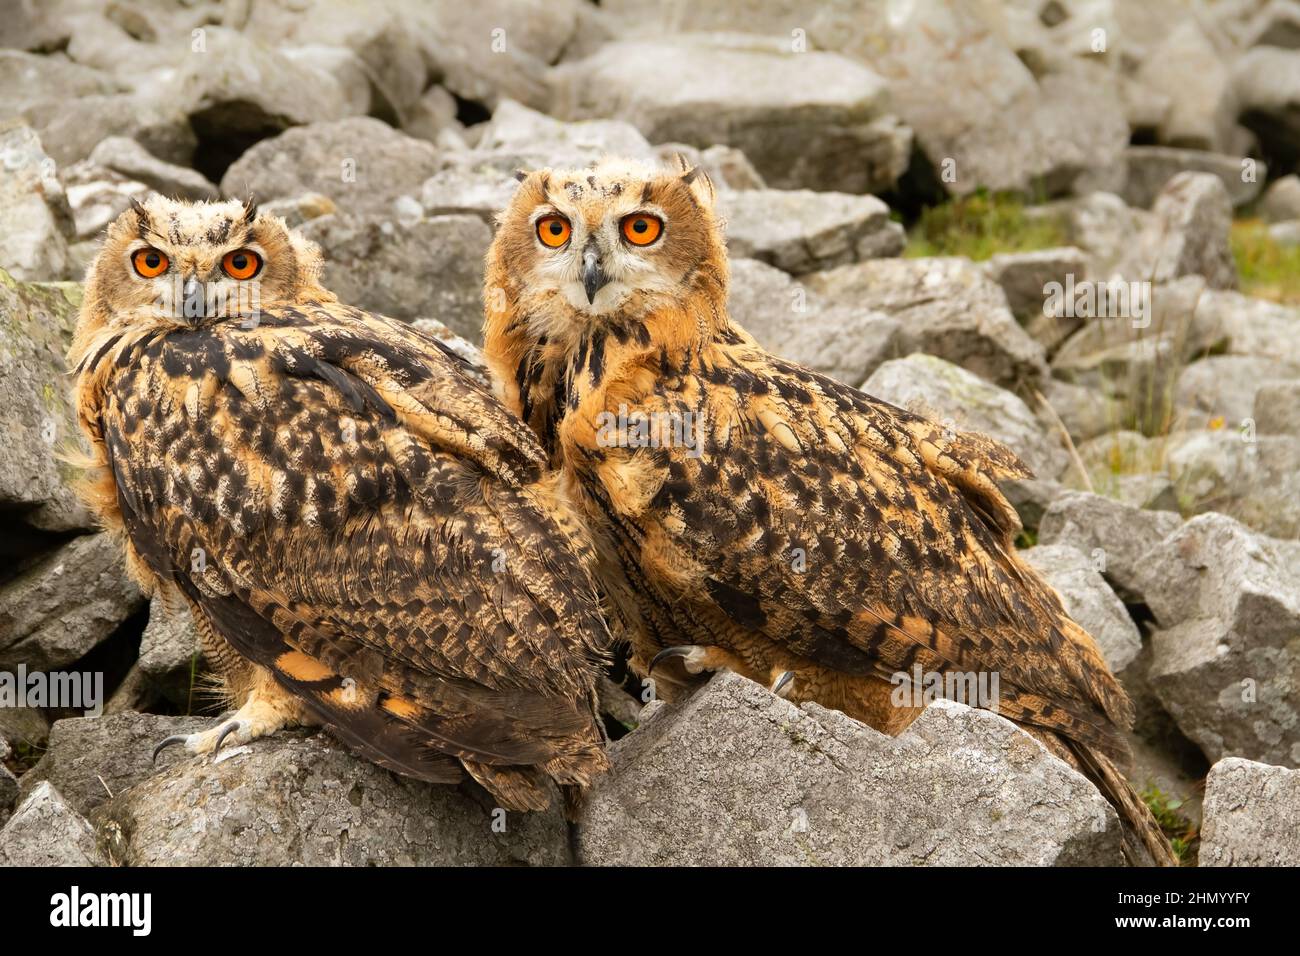 Two young, very large and powerful Eurasian Eagle Owls with bright orange eyes, facing forward in natural rocky outcrop.  Scientific name: Bubo Bubo. Stock Photo